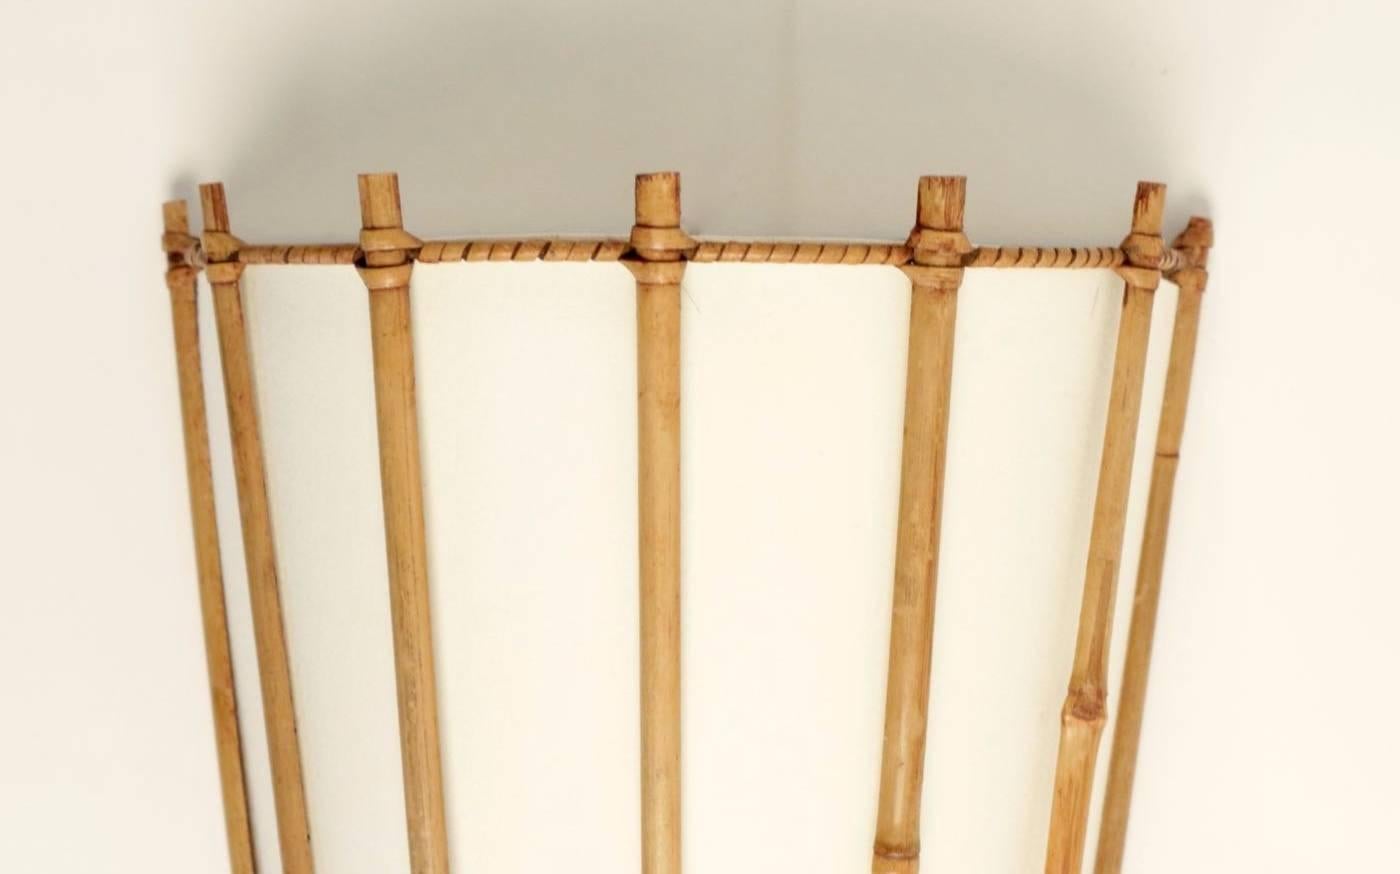 Pair of Louis Sognot bamboo and rattan sconces, 1959.

Consists of a half cylinder made of bamboo stems tied with rattan.
Lampshade made of off-white cotton, granted to the original.

One bulb per sconce. 
Can be rewired to US standards.